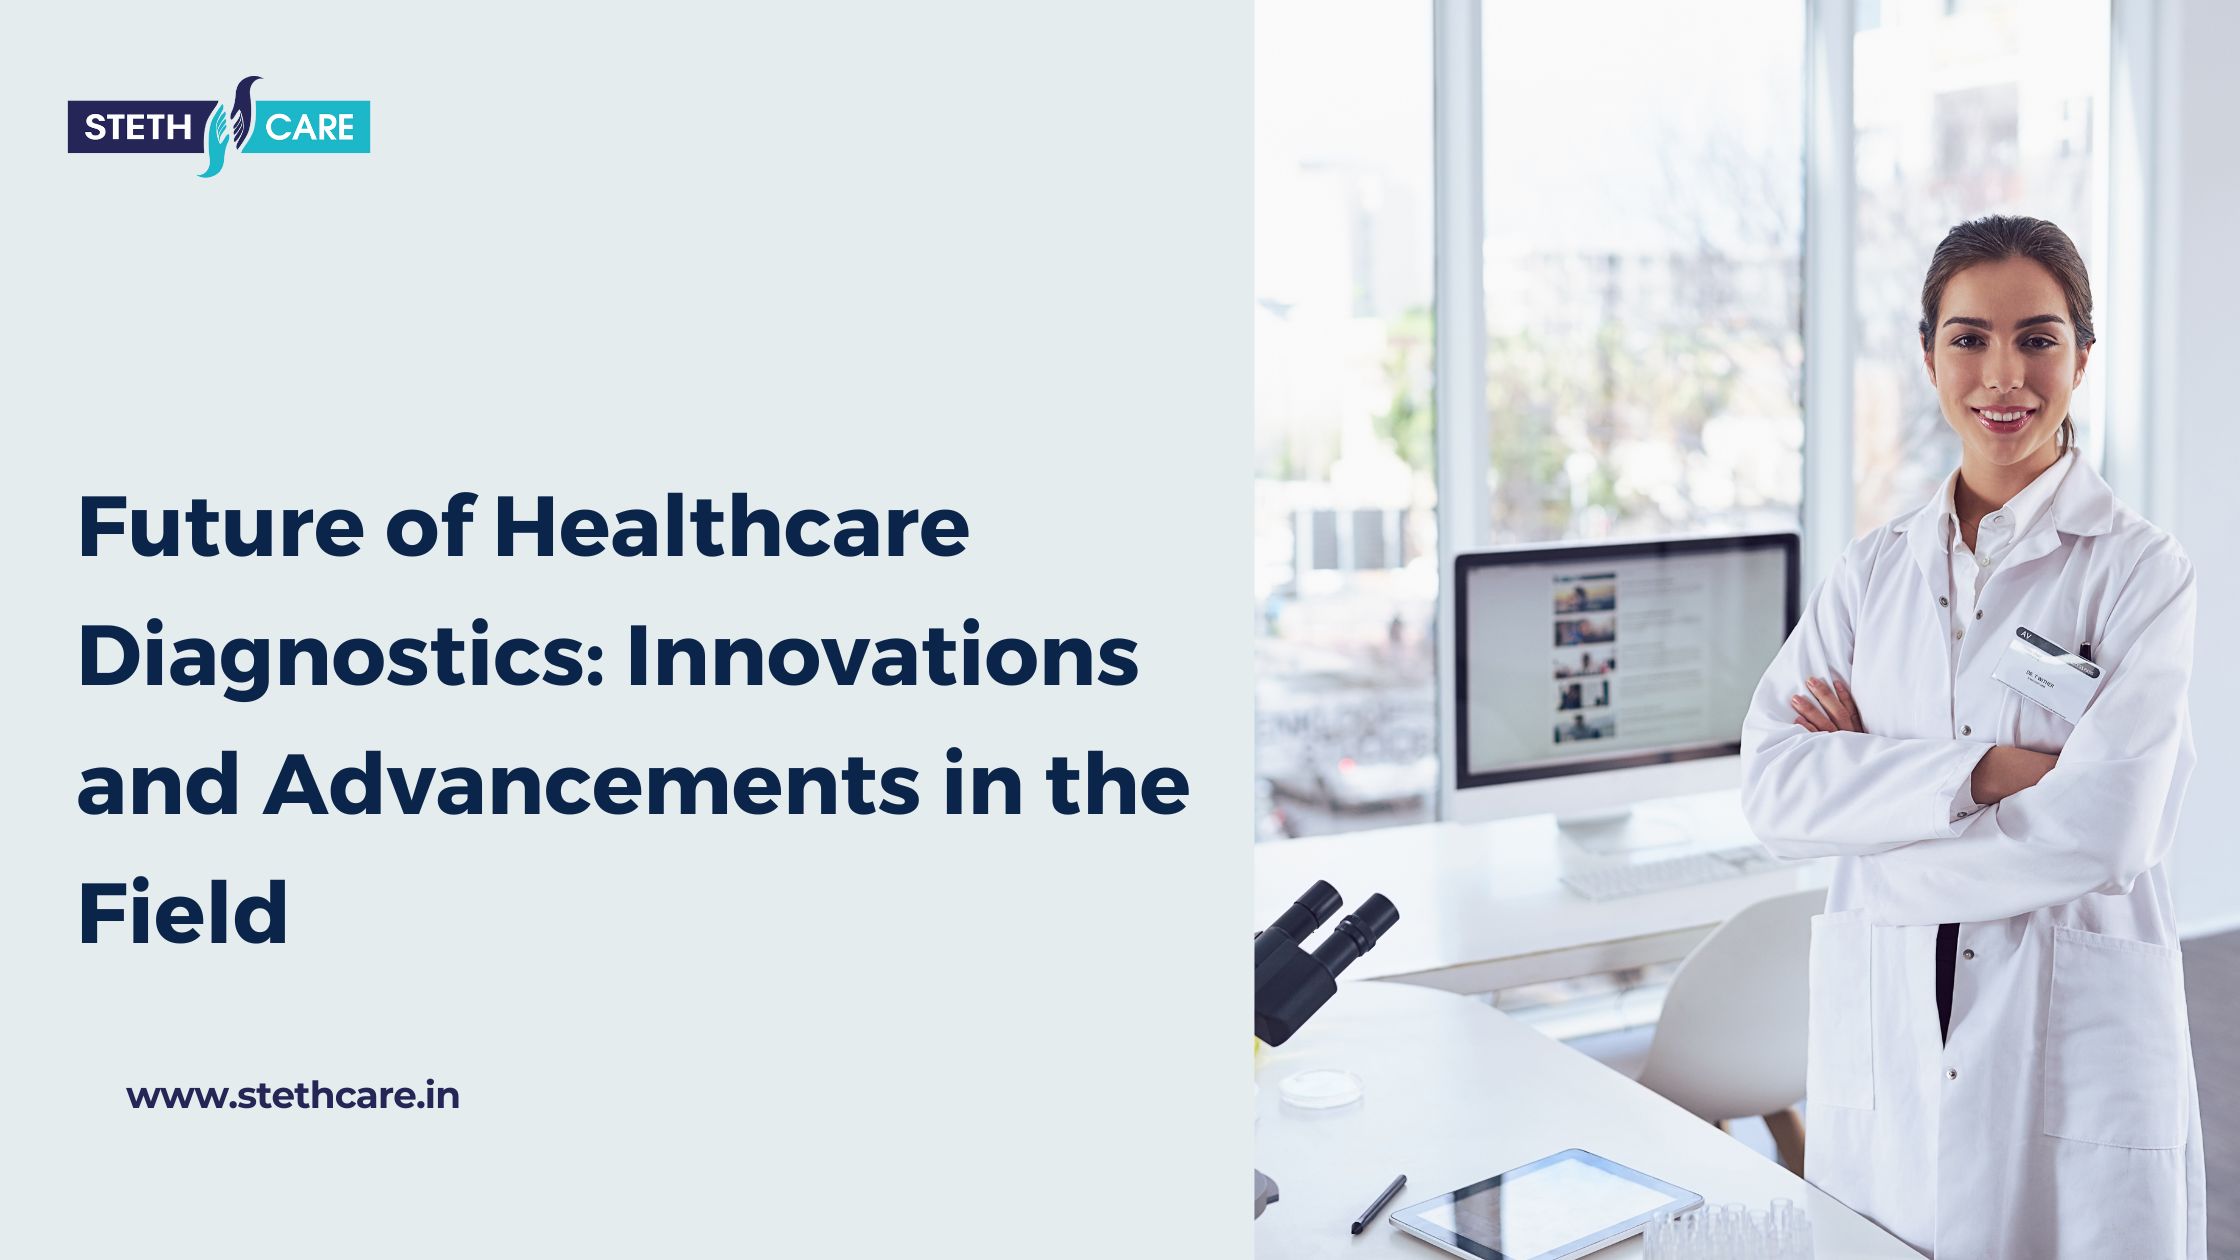 The Future of Healthcare Diagnostics_ Innovations and Advancements in the Field